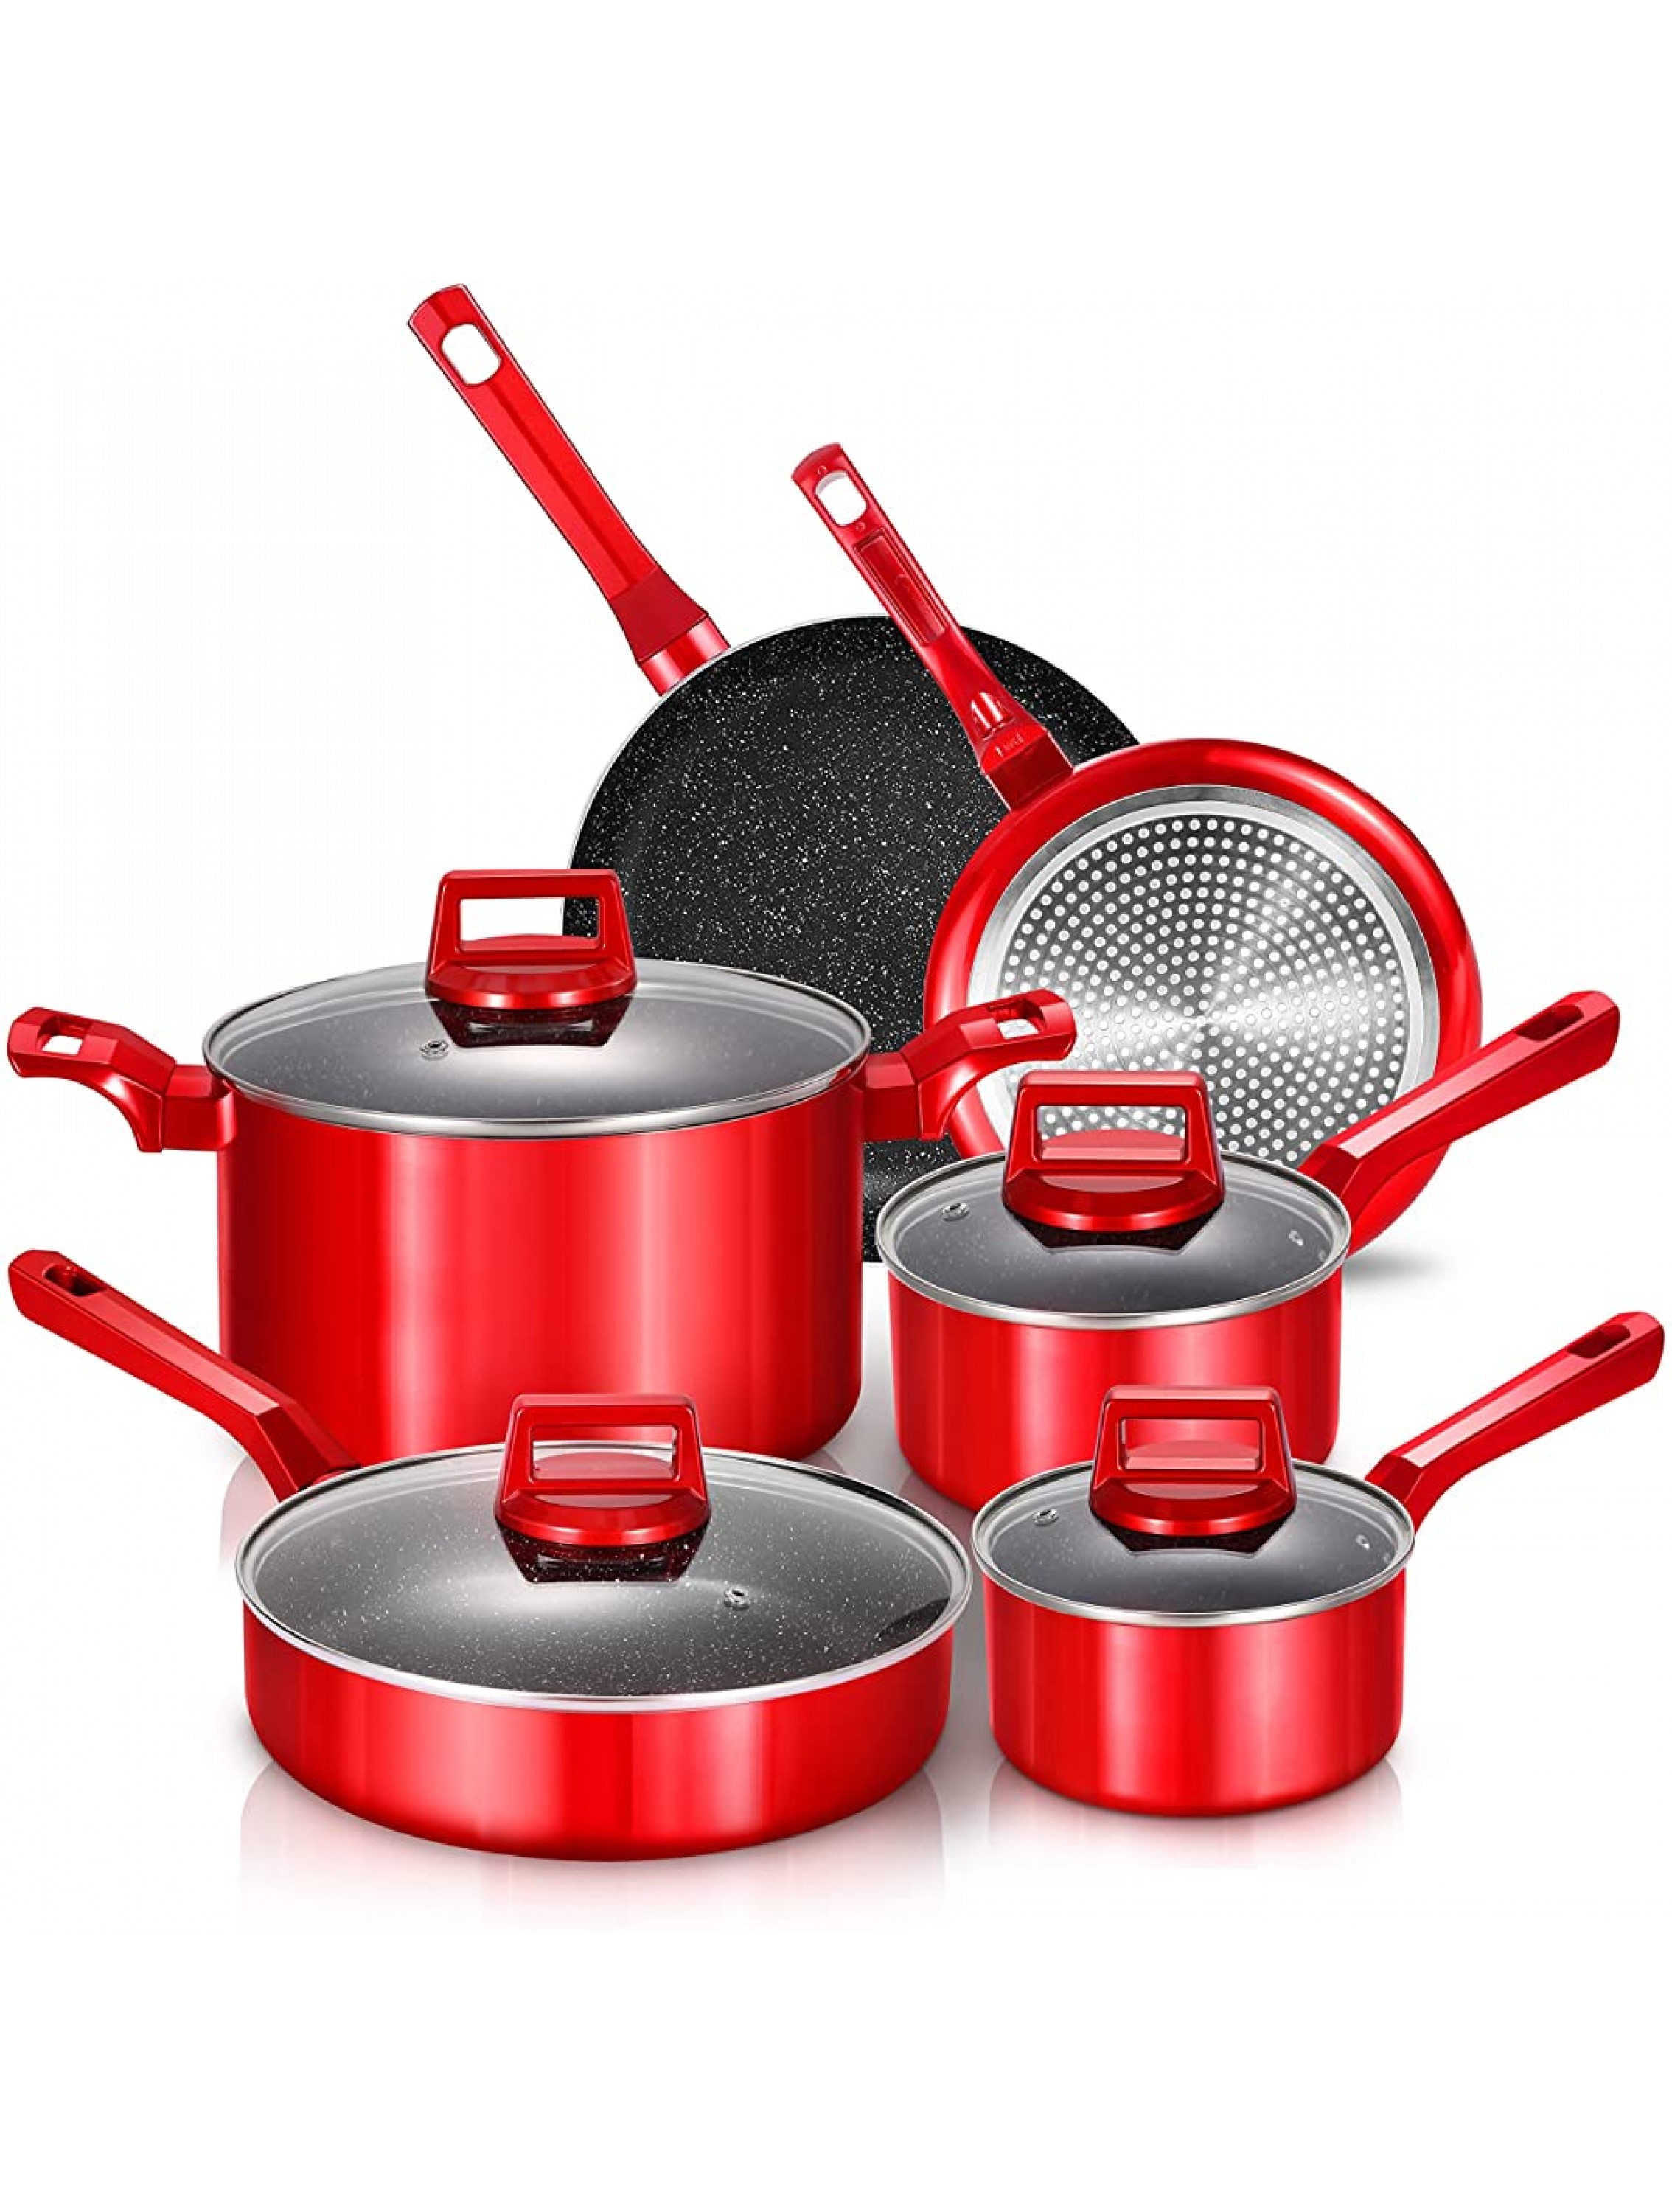 10 Pcs Pots and Pans Sets Nonstick Cookware Set Induction Pan Set Chemical-Free Kitchen Sets Stone-Derived Coating Saucepan Saute Pan with Lid Frying Pan Red - BWQLXBVEP